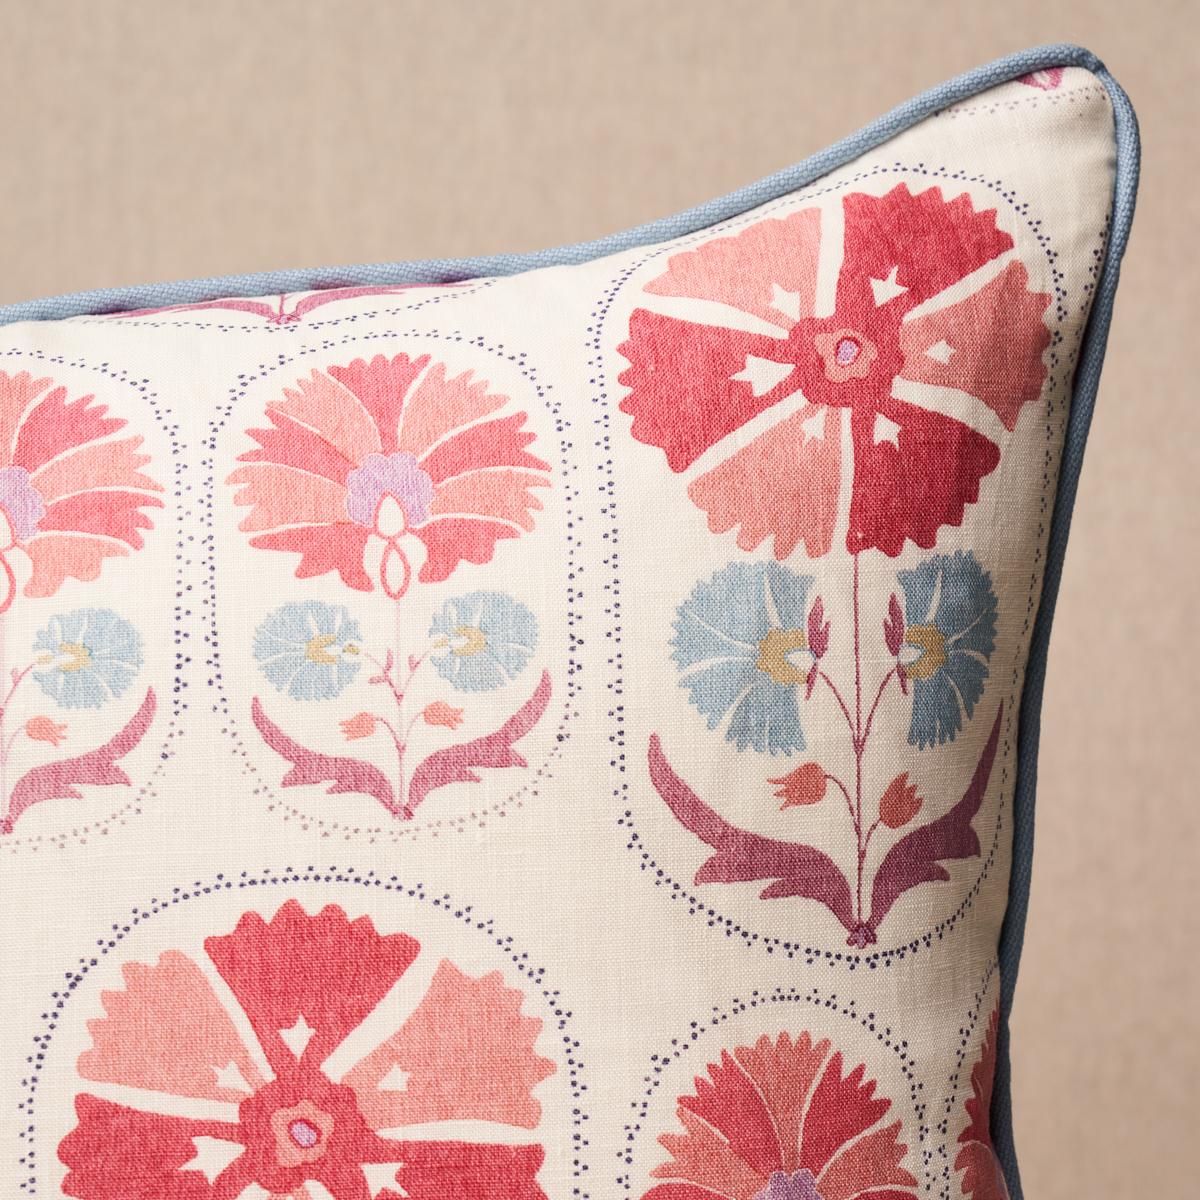 This pillow features Anjuna Floral Linen Print. Inspired by antique Suzani textiles, Anjuna Floral Linen Print in mulberry was created by our in-house design studio. Irregular stylized flowers give this mid-scale pattern the look of a hand-block